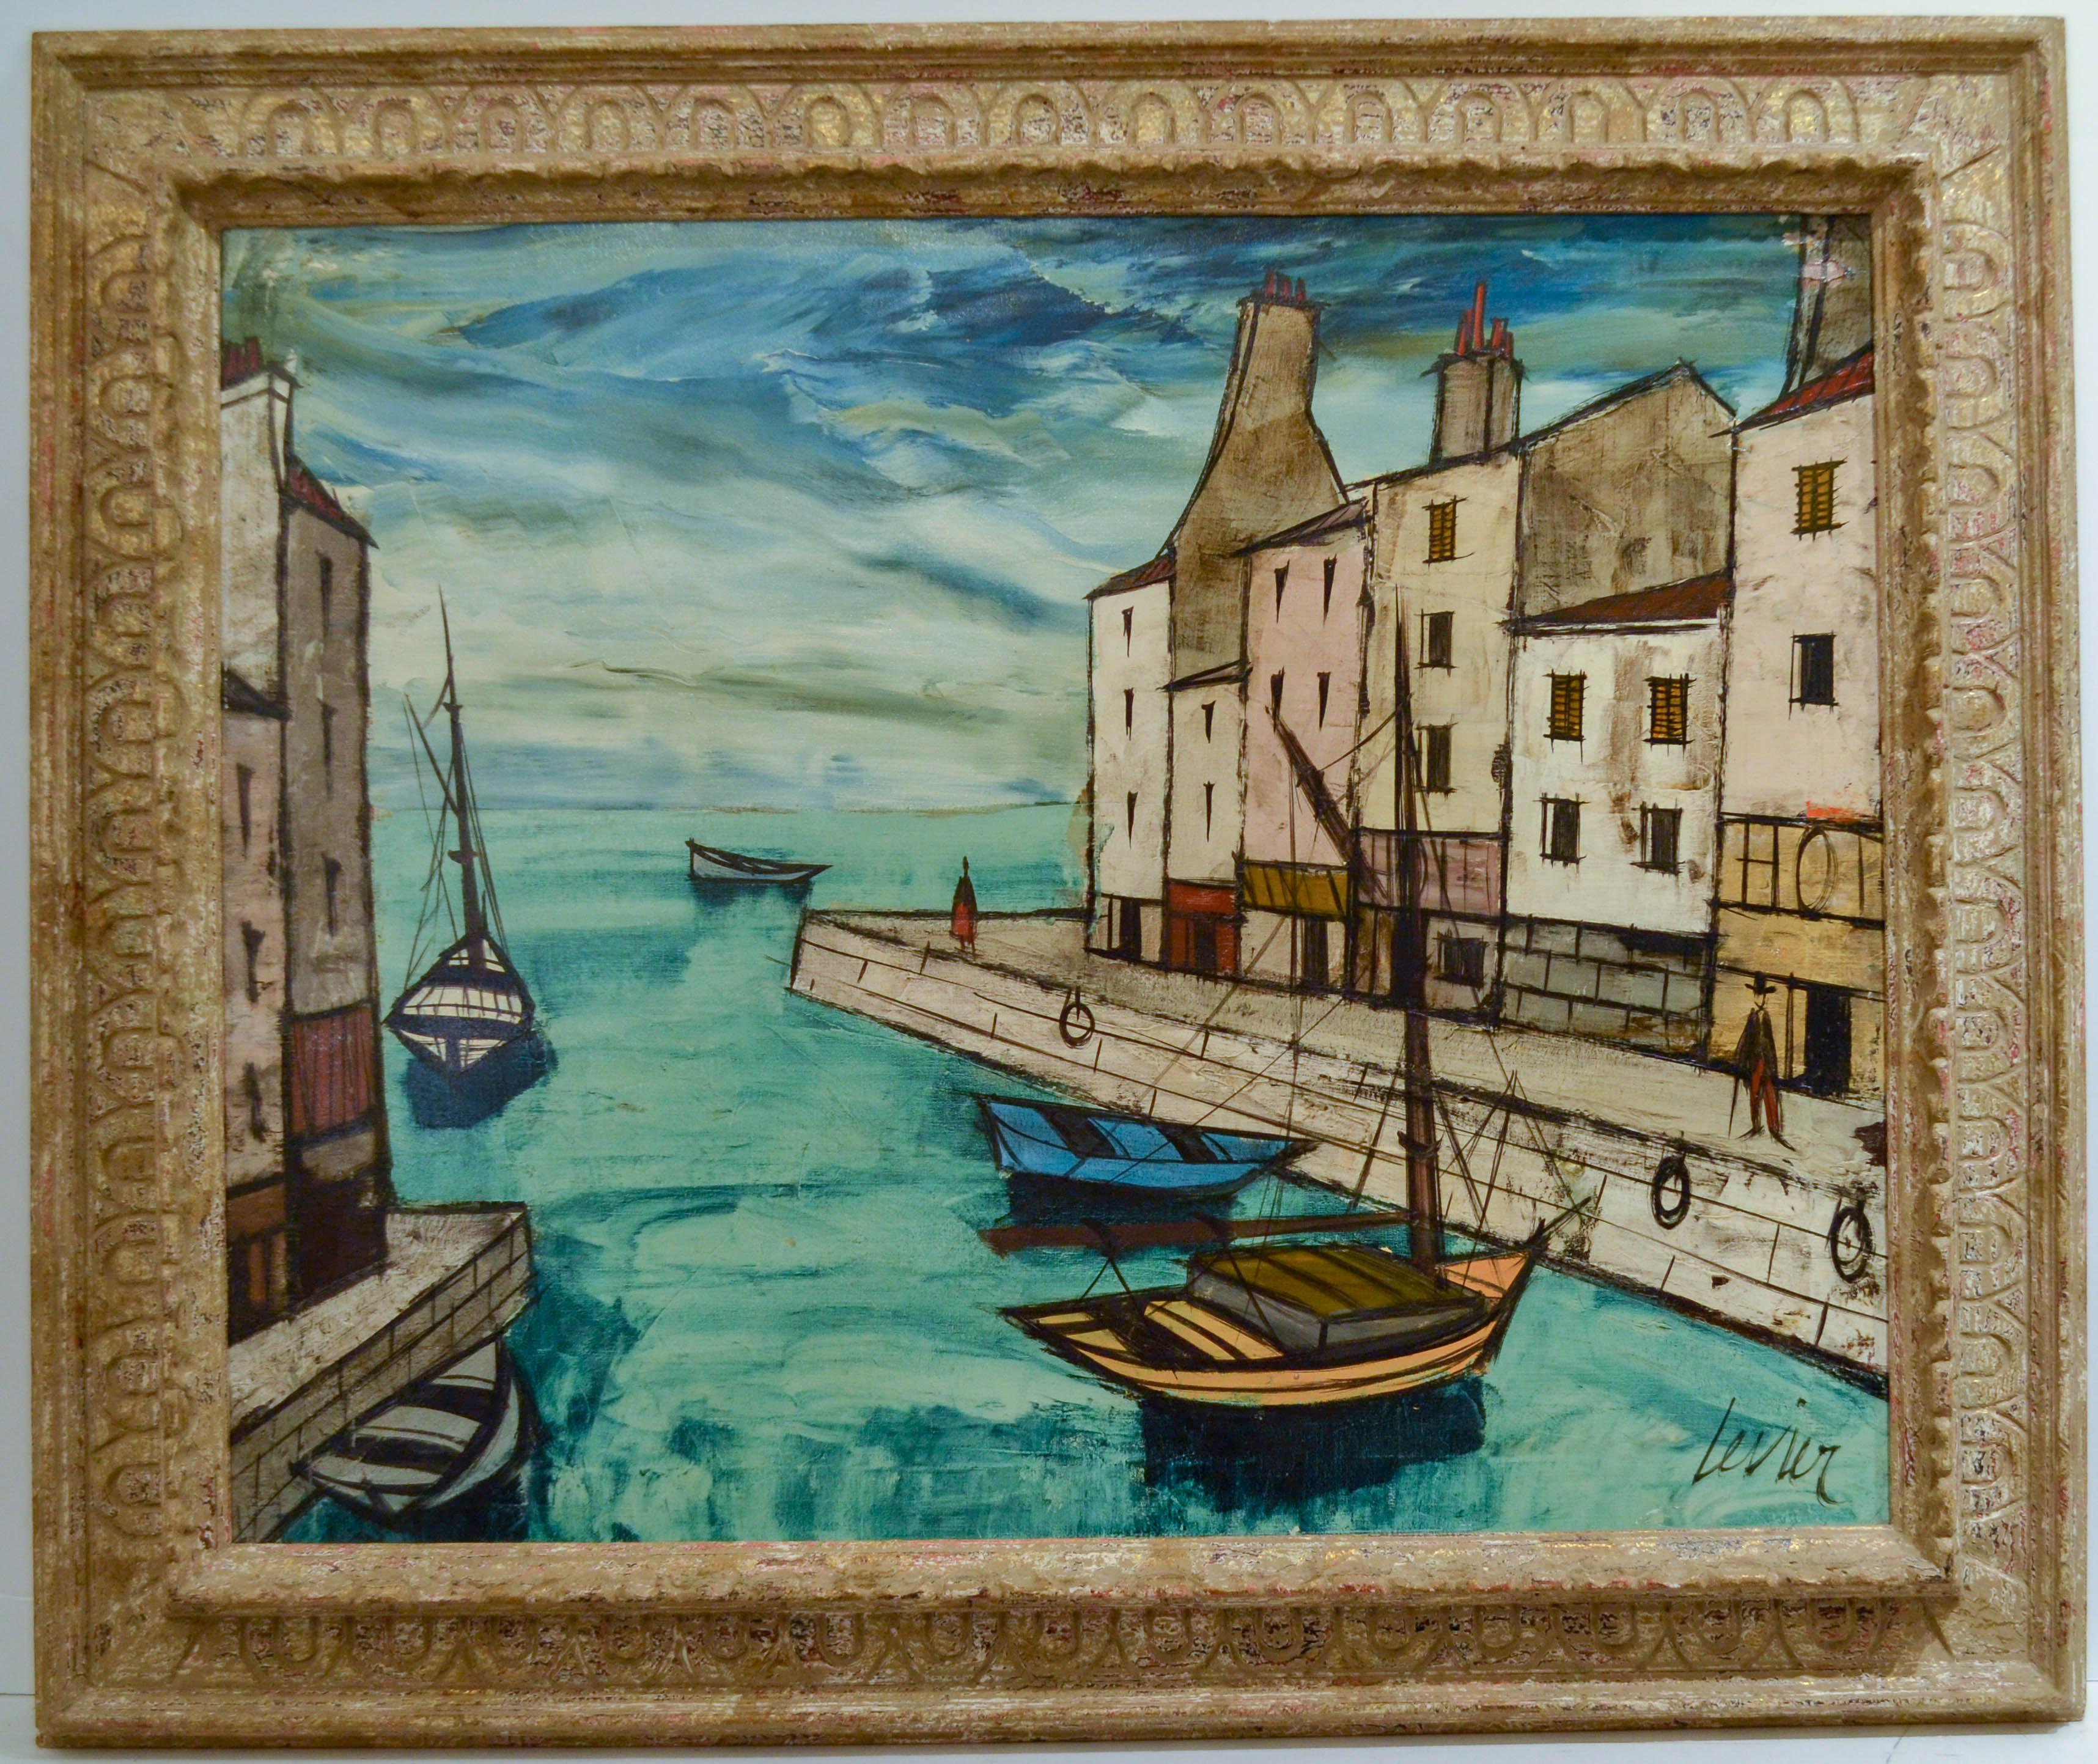 "Boats in a Canal" Oil on Canvas 24 x 30 - Painting by Charles Levier